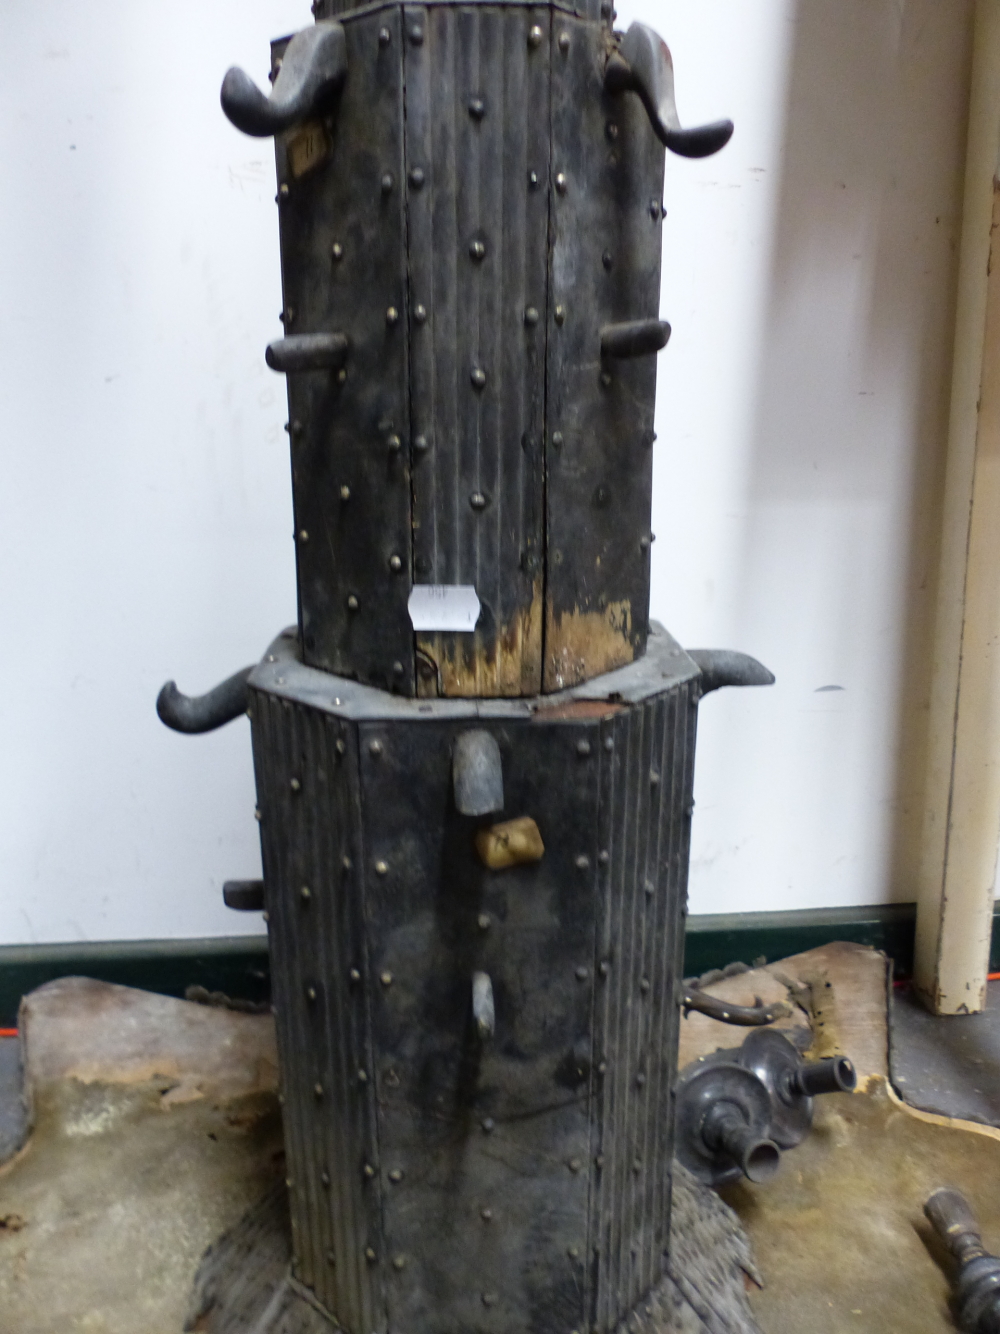 AN UNUSUAL EASTERN, HORN MOUNTED, FLOOR STANDING, CANDLE STAND CENTREPIECE. - Image 5 of 11